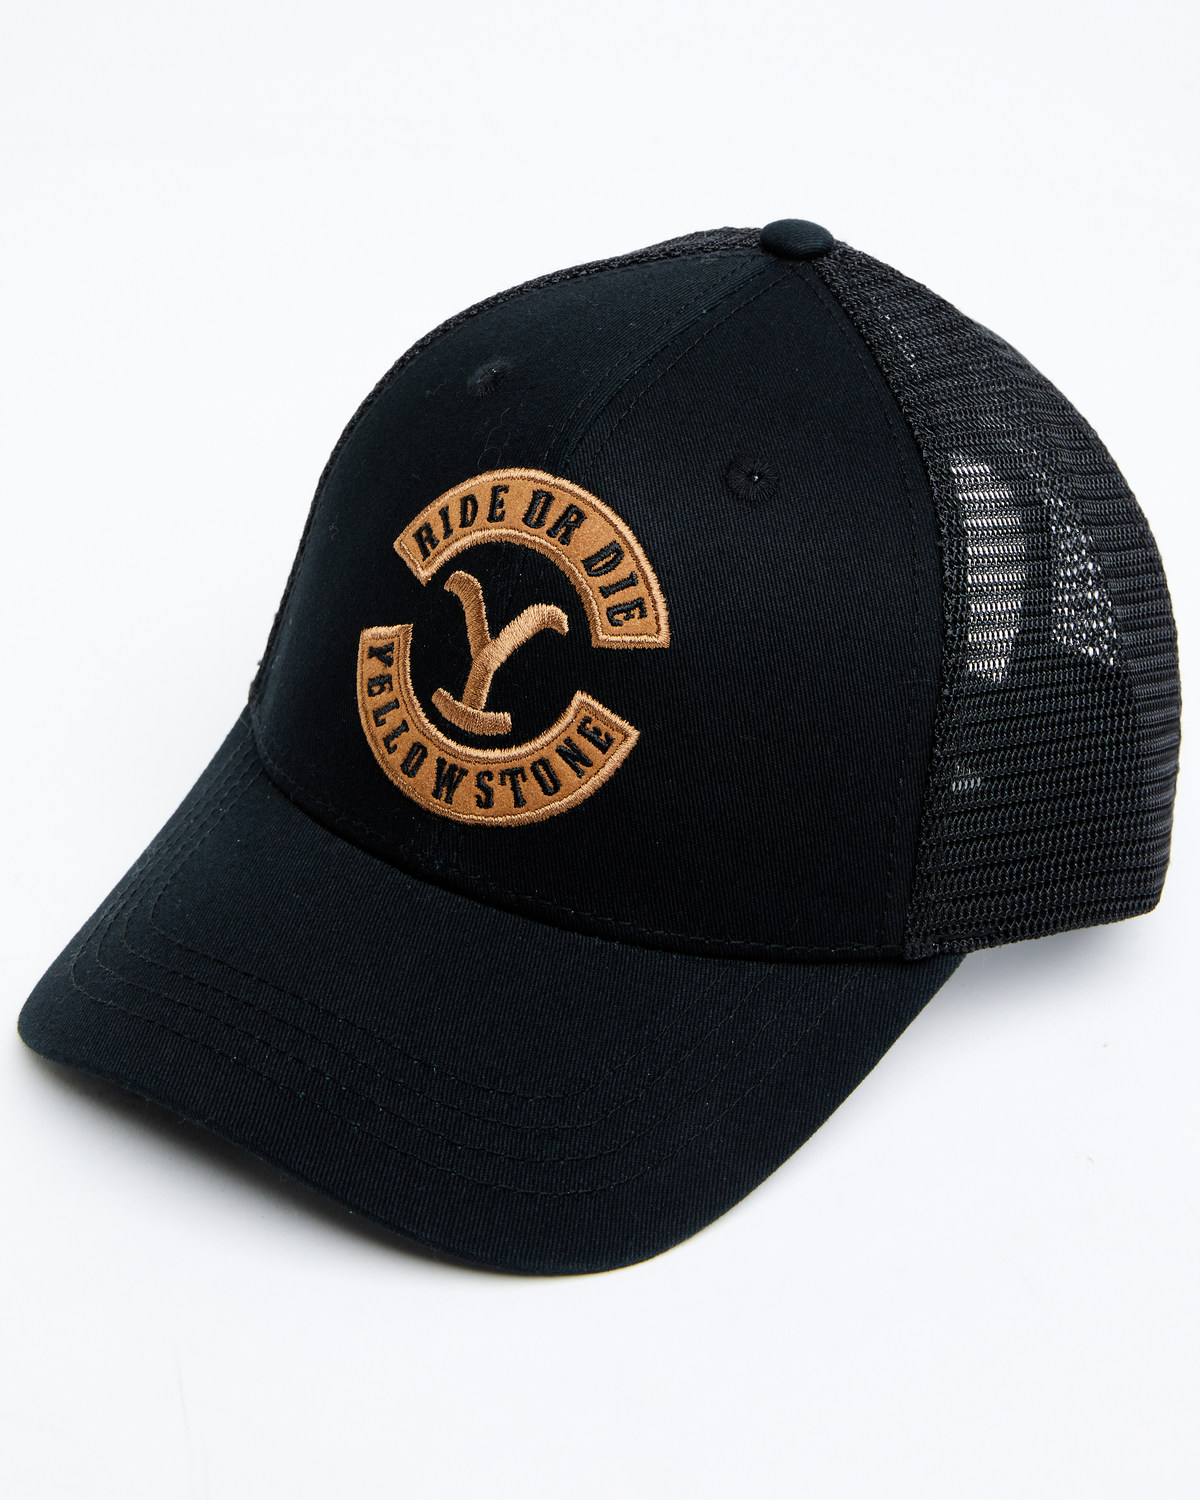 Paramount Network's Yellowstone Men's Ride Or Die Embroidered Ball Cap